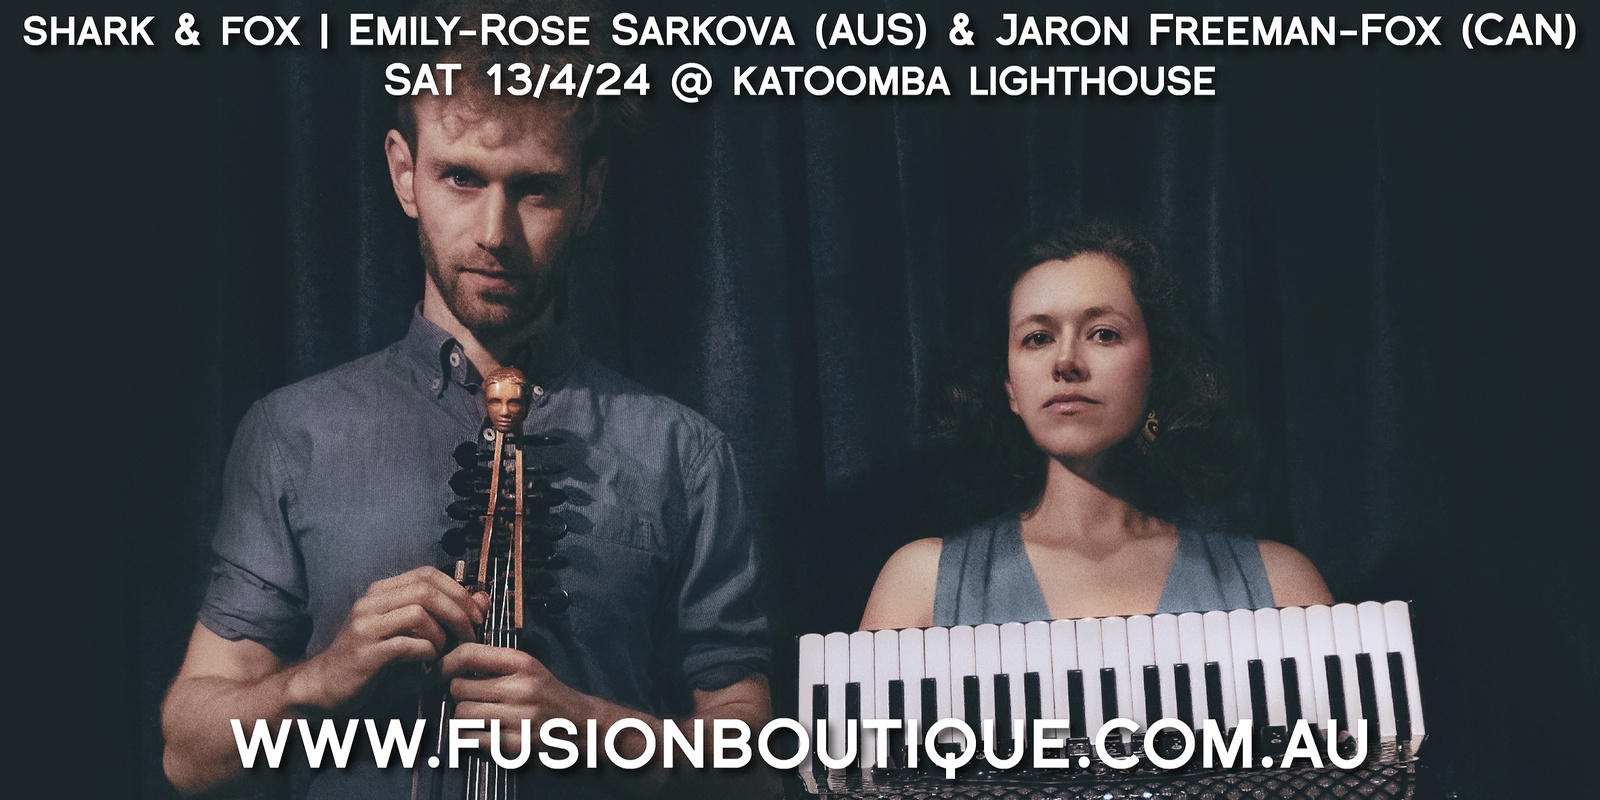 Banner image for FUSION BOUTIQUE presents SHARK & FOX | Emily-Rose Sarkova (AUS) & Jaron Freeman-Fox (CAN) in Concert at Katoomba Lighthouse, Blue Mountains